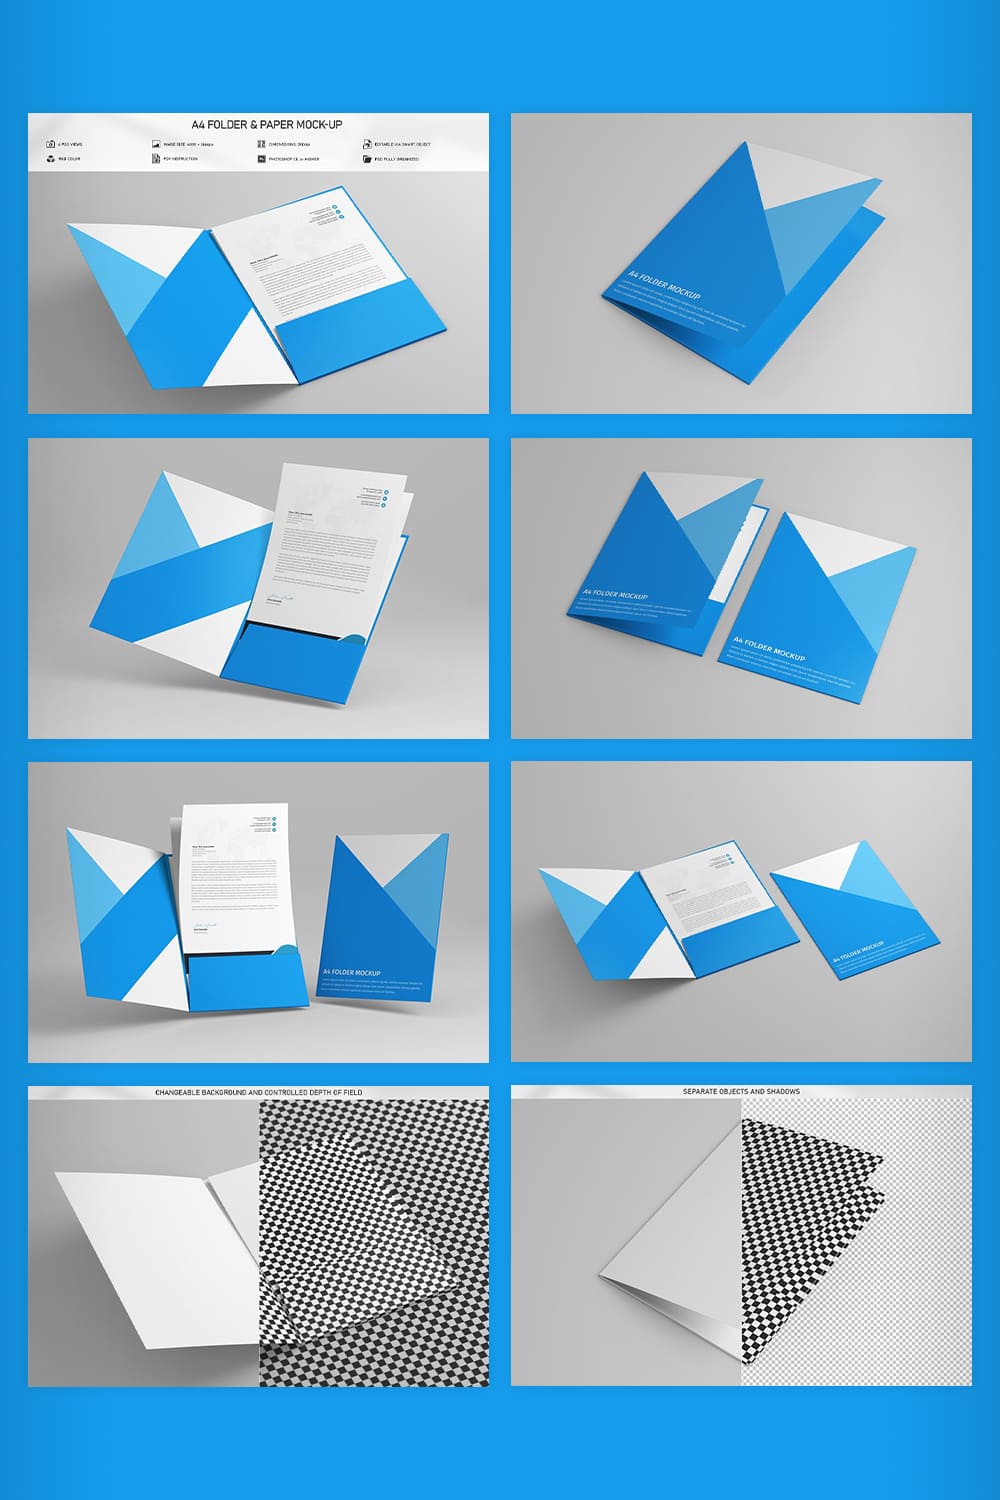 A pack of images of A4 folder & paper with an enchanting design.